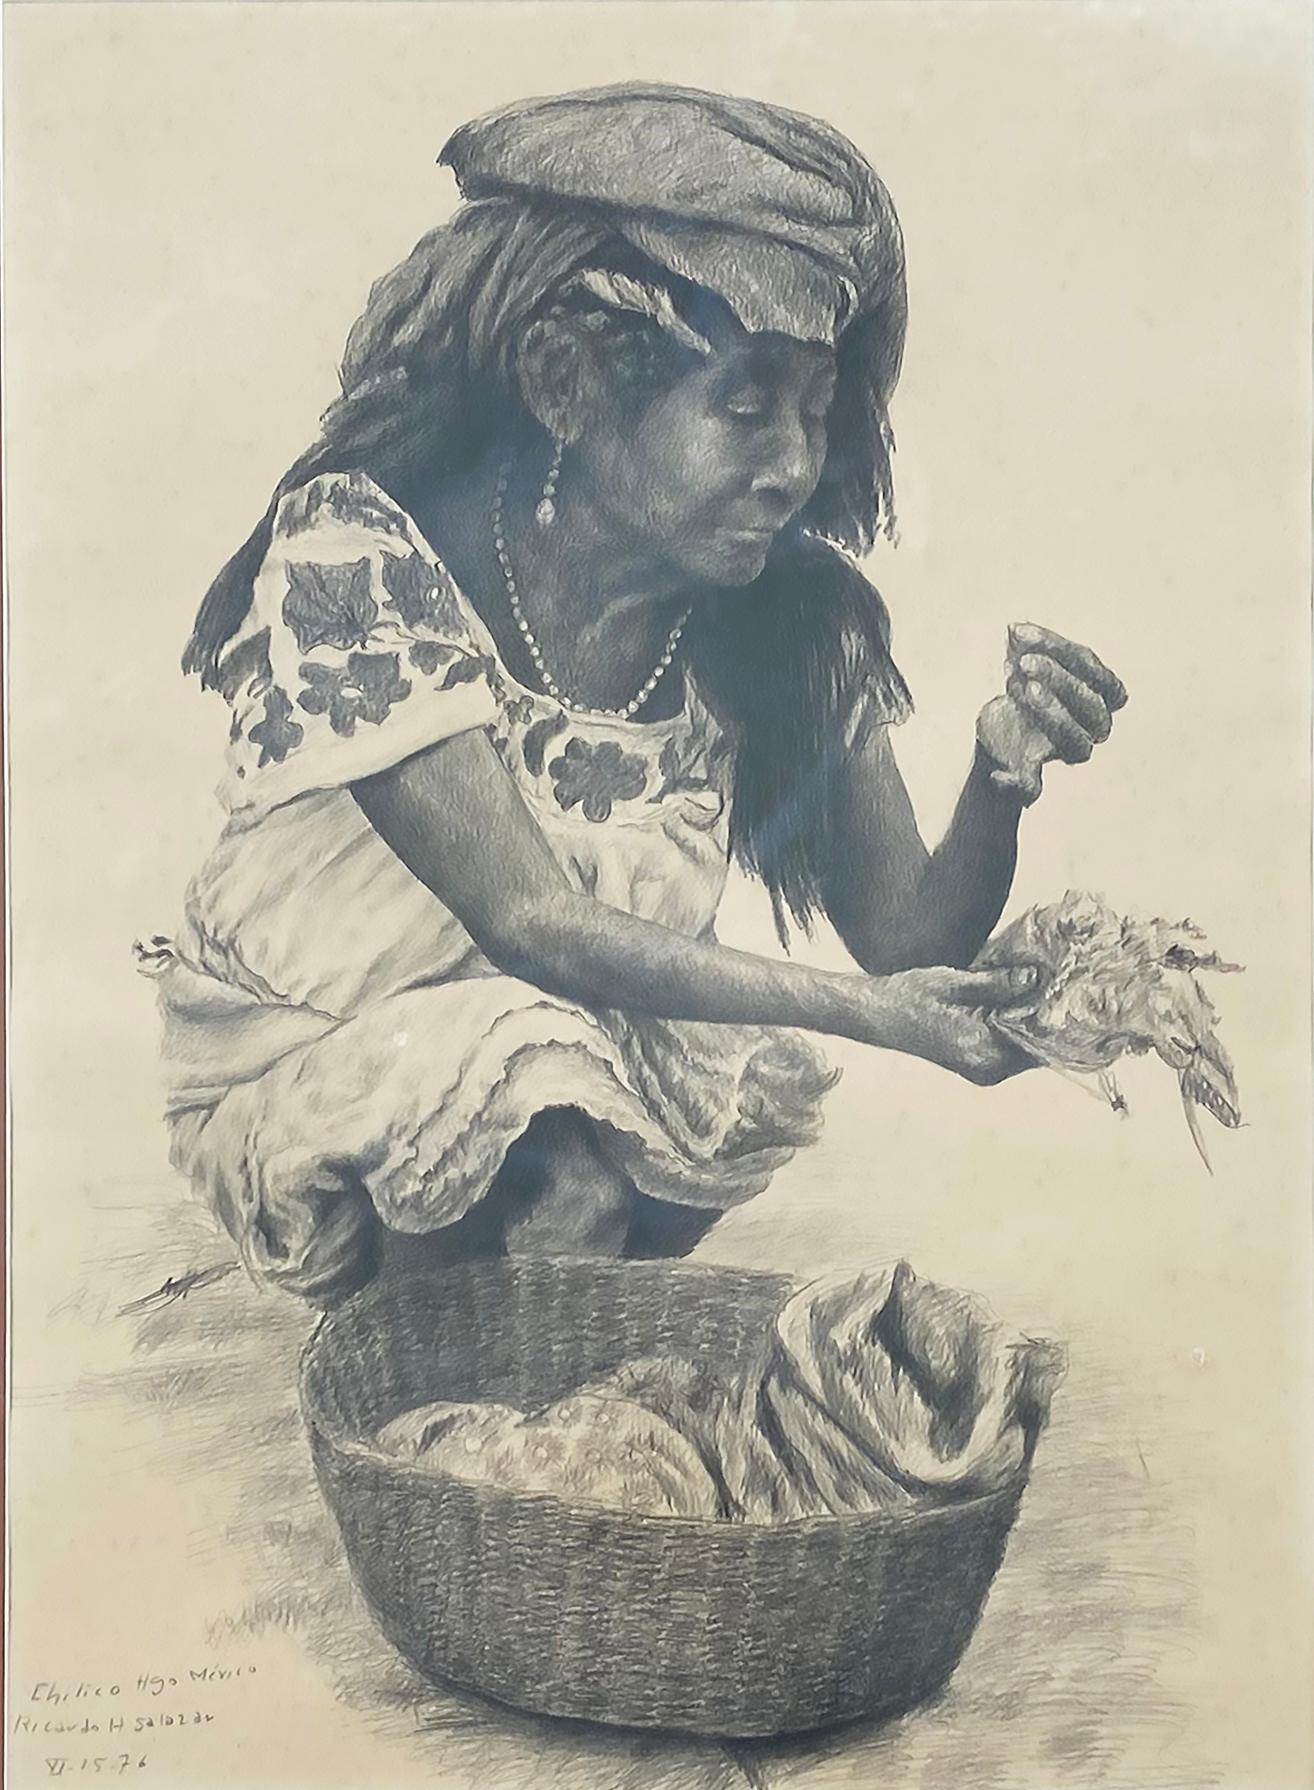 1976 Mexican Ricardo H. Salazar Pencil Drawing/Paper, Hidalgo, MX

Offered for sale is an intricately and masterfully drawn realistic pencil drawing of a Mexican woman in the city of Chilimico, Hidalgo, Mexico by Ricardo Salazar (1922-2006).  The